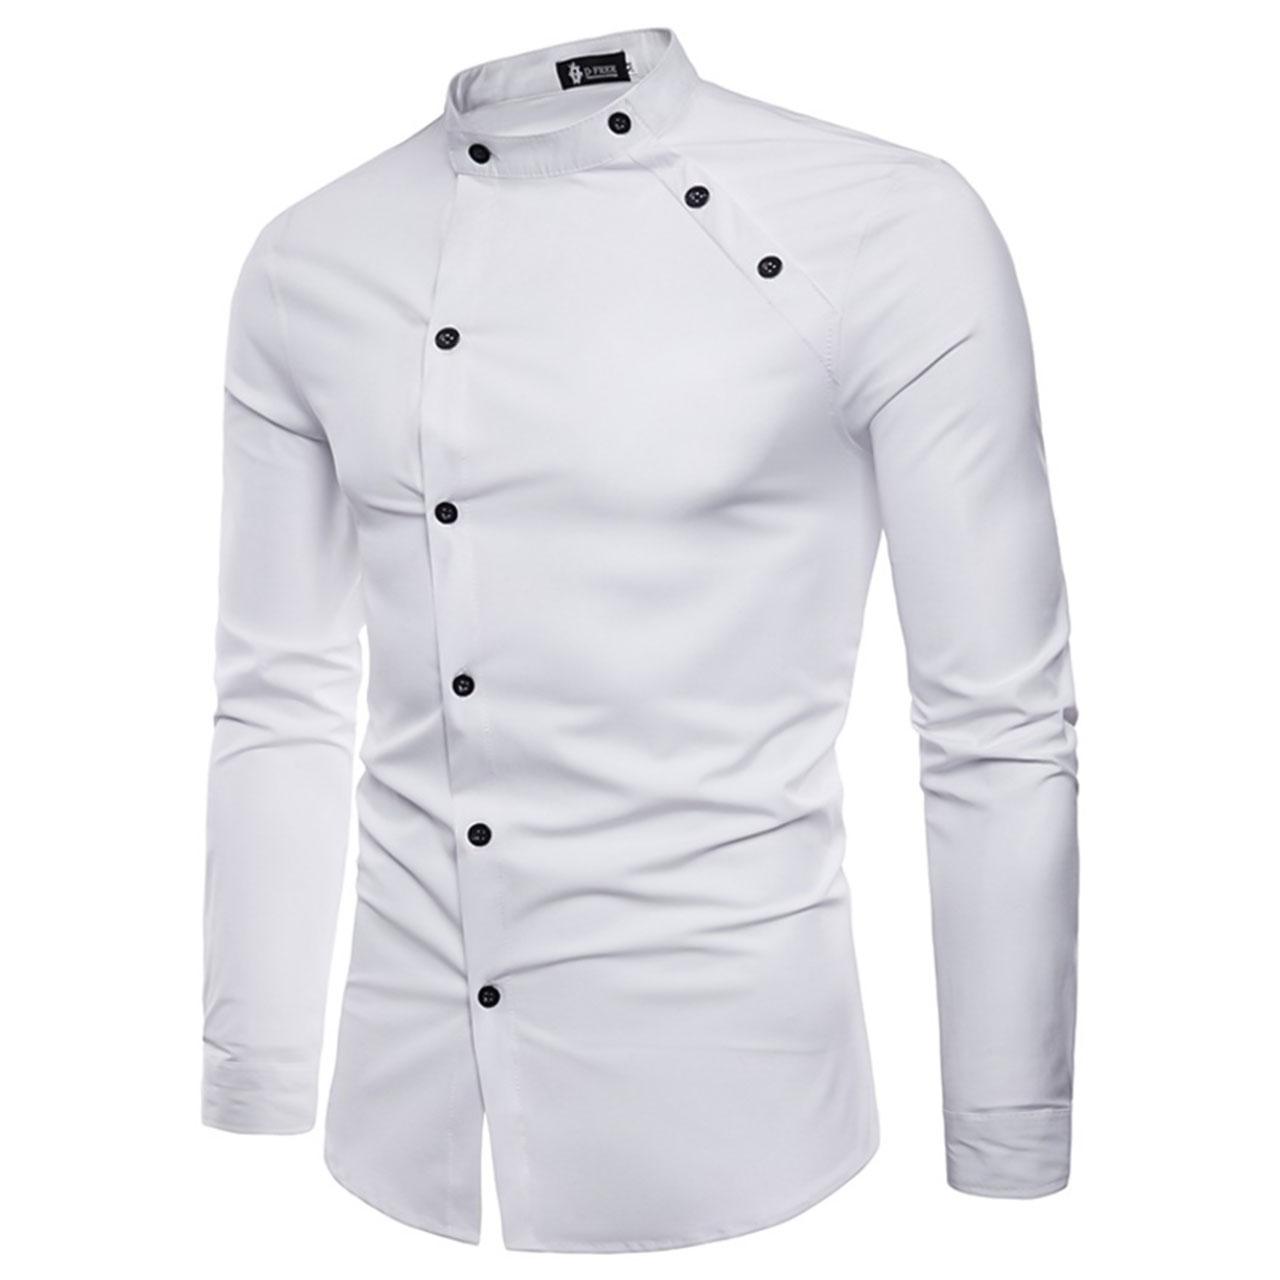 Men's Daily Solid Colored Cotton Plain Long Sleeve White Shirt